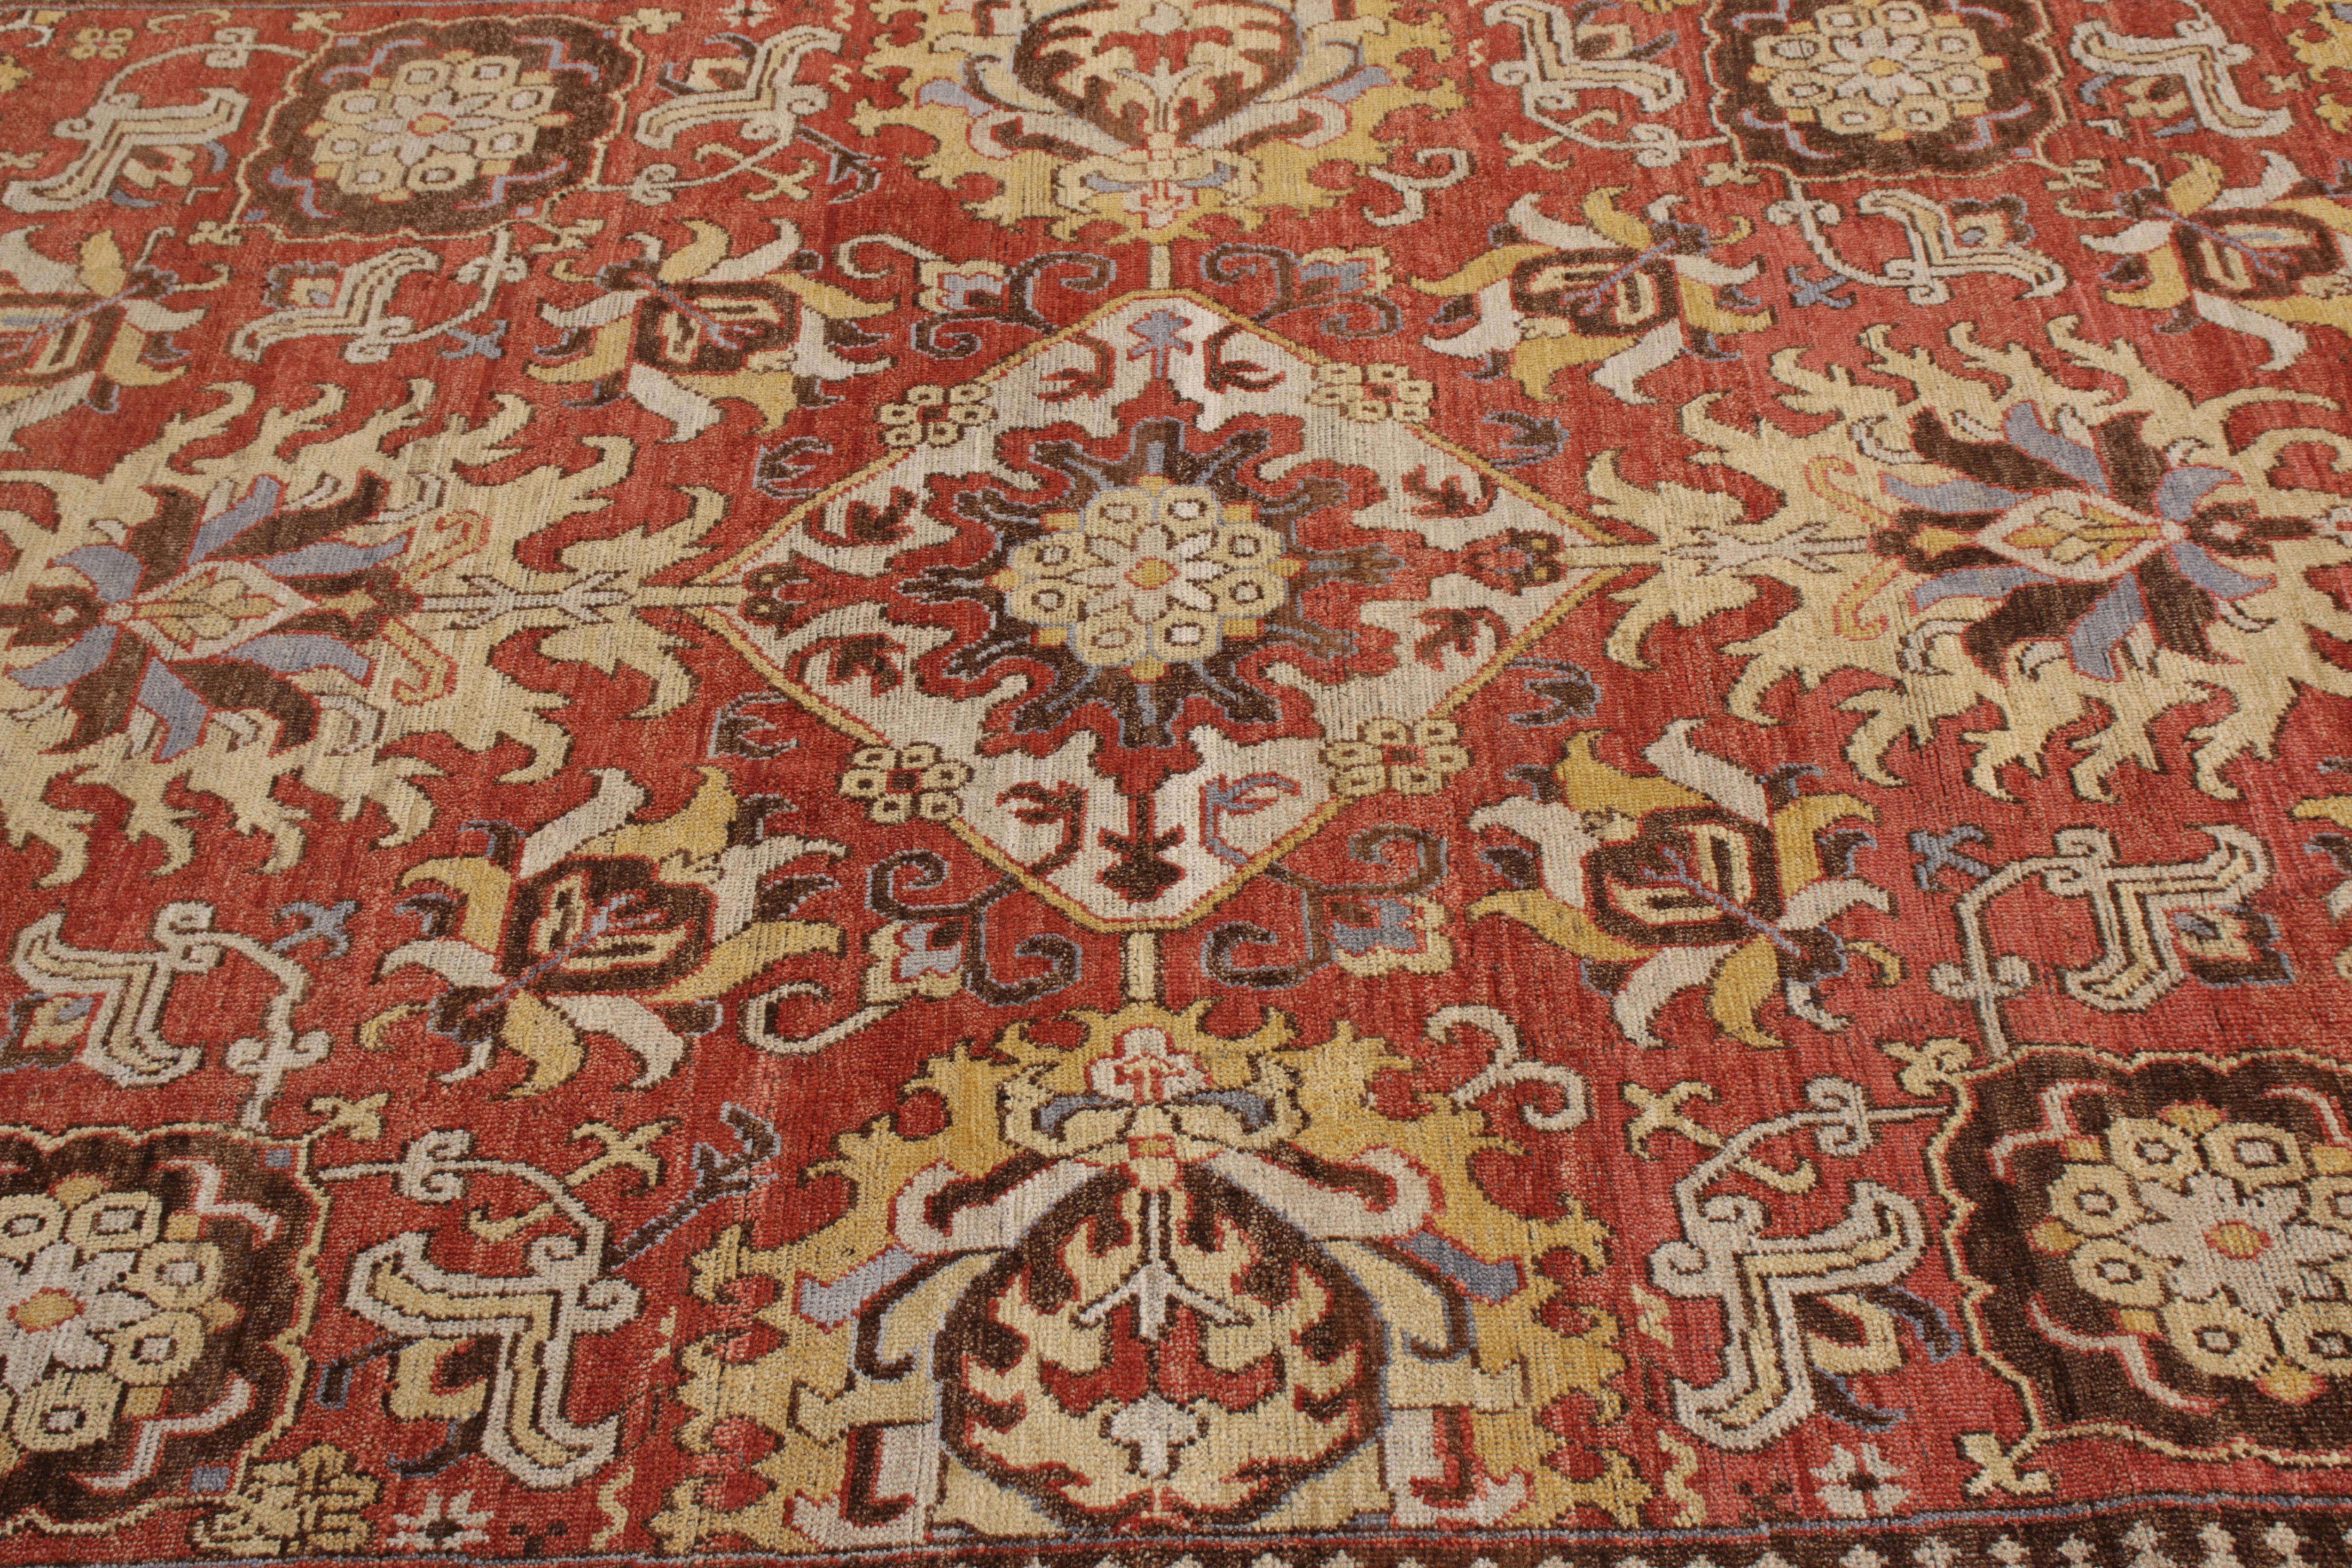 Indian Rug & Kilim’s Kuba Style Rug in Red and Beige-Brown Floral Pattern For Sale